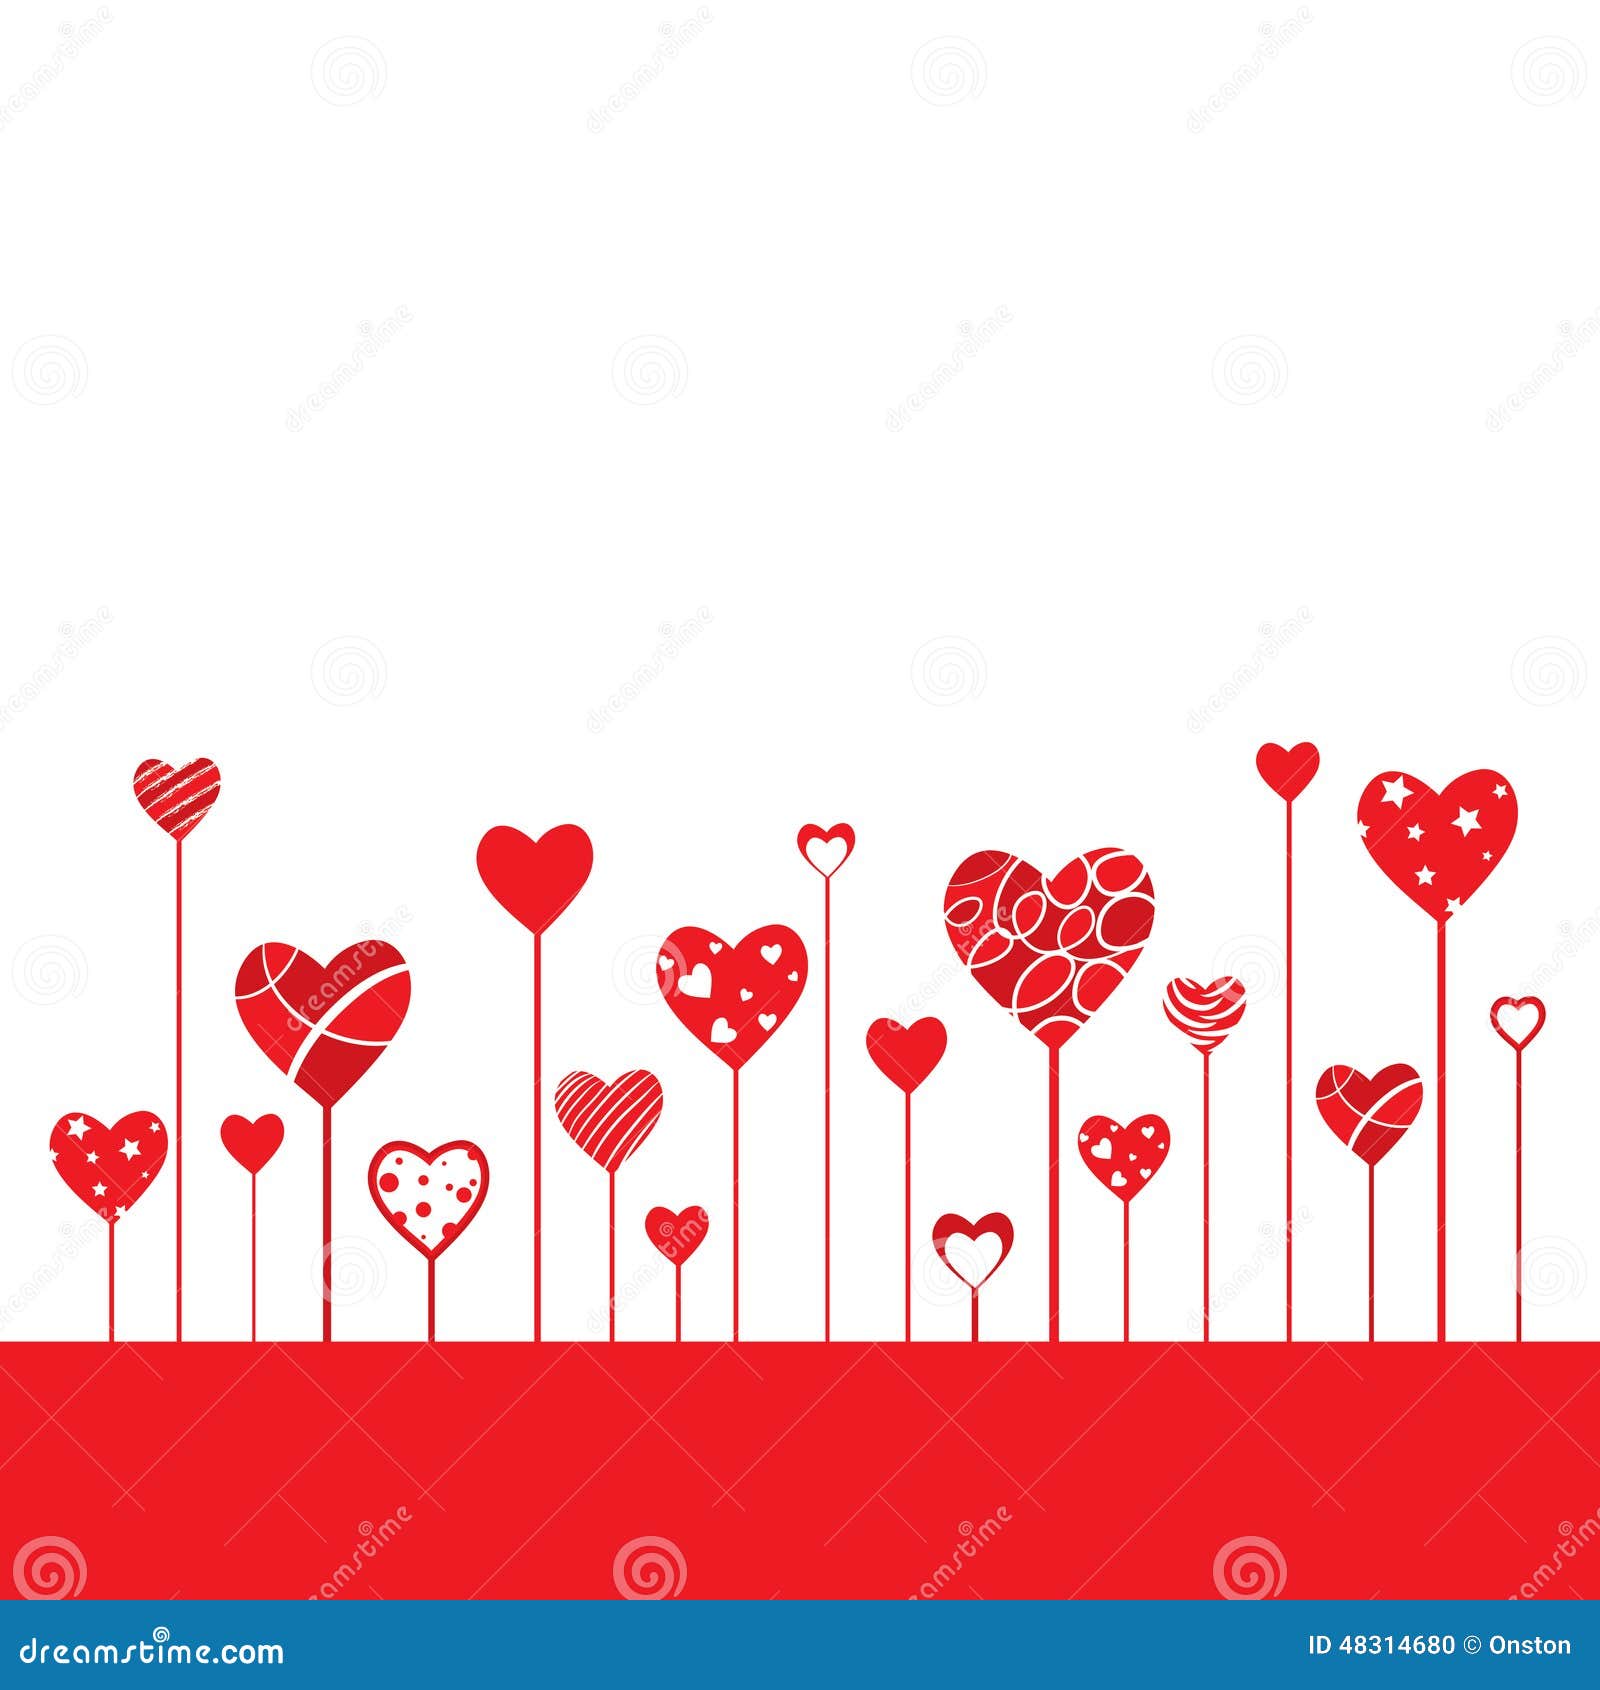 Heart Shapes Background stock vector. Illustration of longing - 48314680